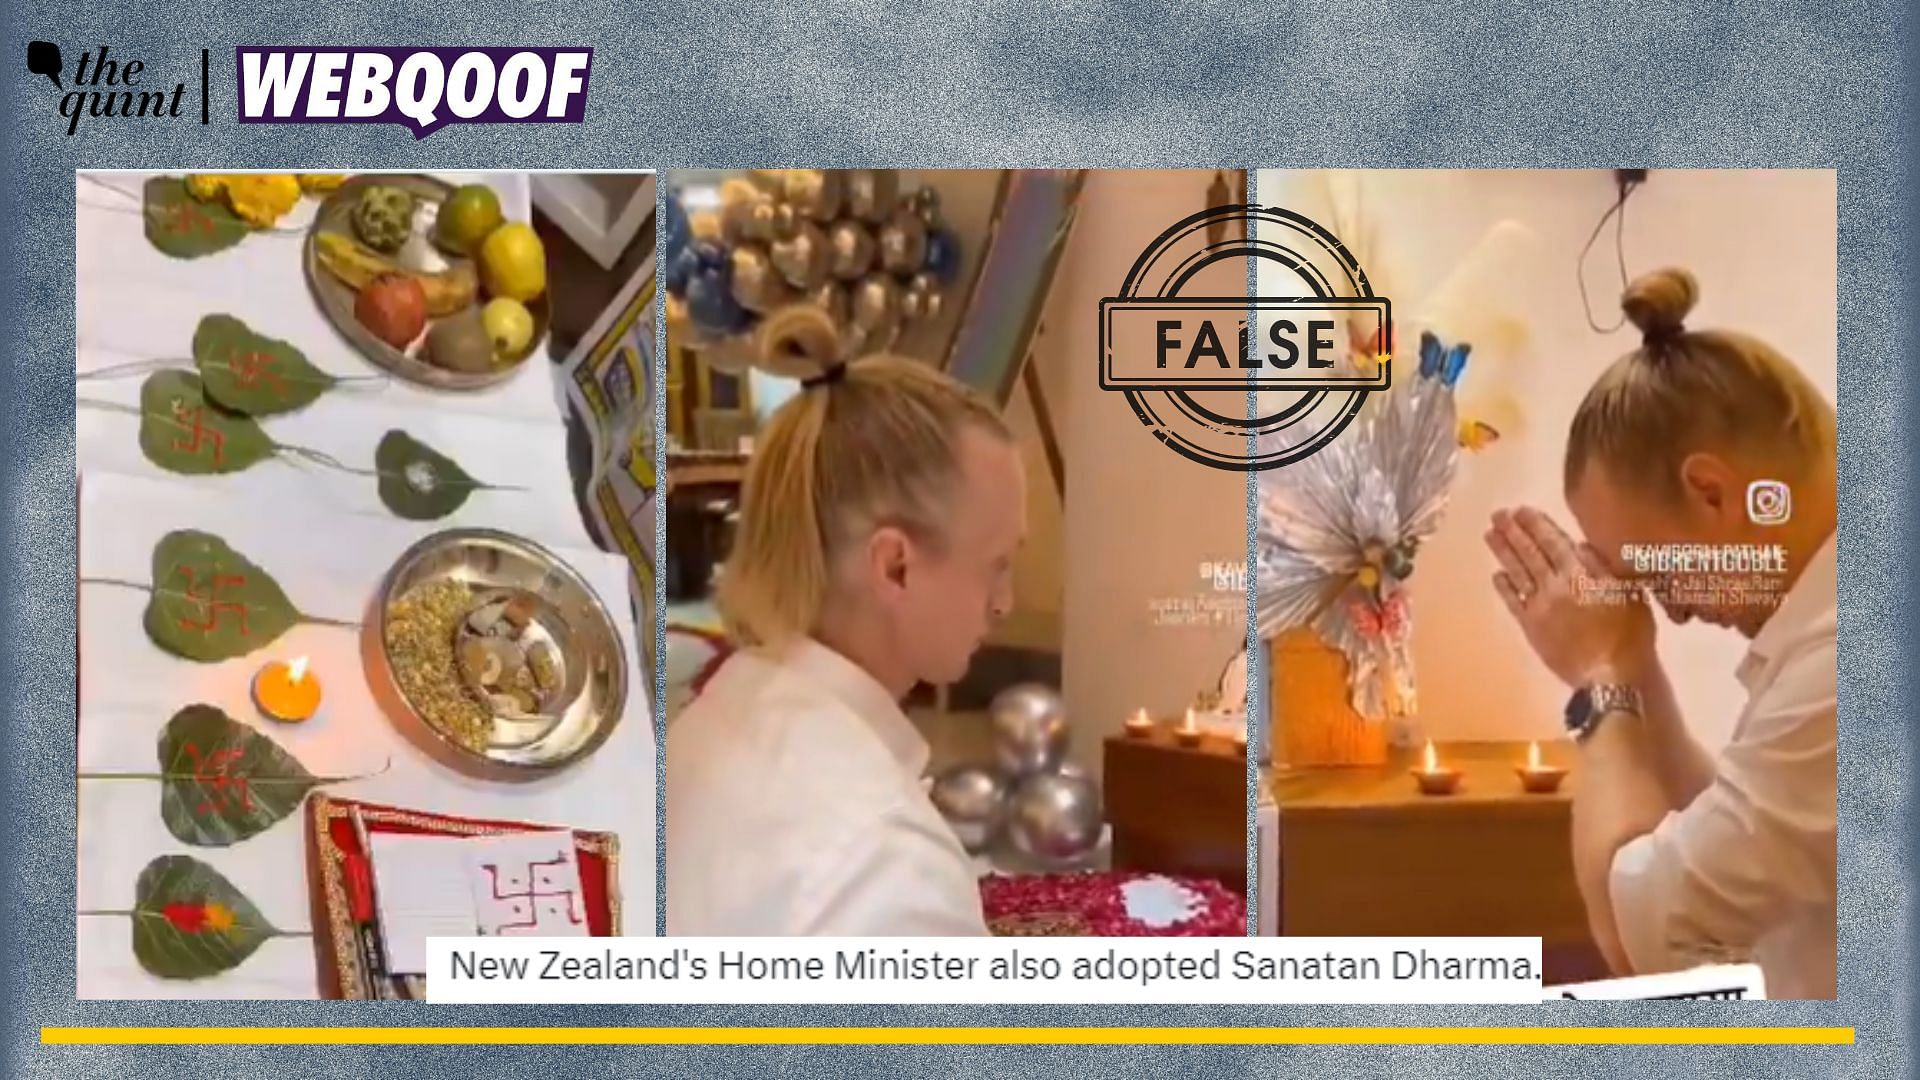 <div class="paragraphs"><p>Fact-Check | The video does not show the Home Minister of New Zealand adopting Sanatana Dharma.</p></div>